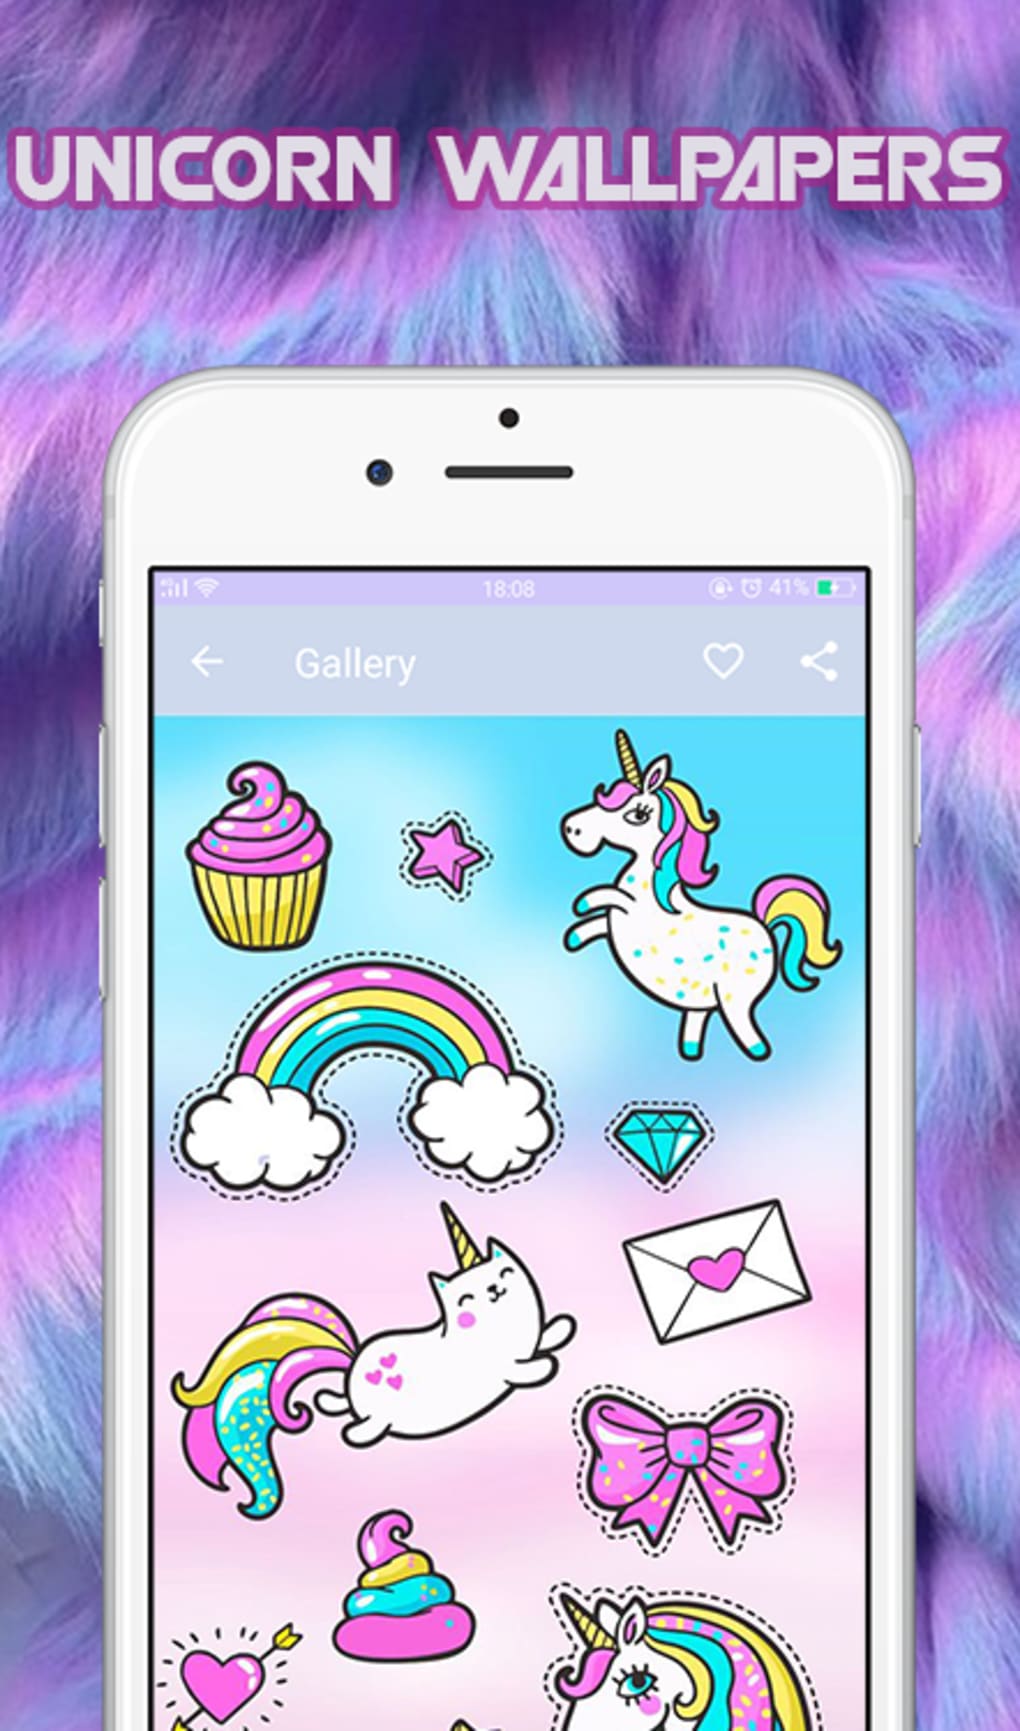 Unicorn Wallpapers APK for Android - Download